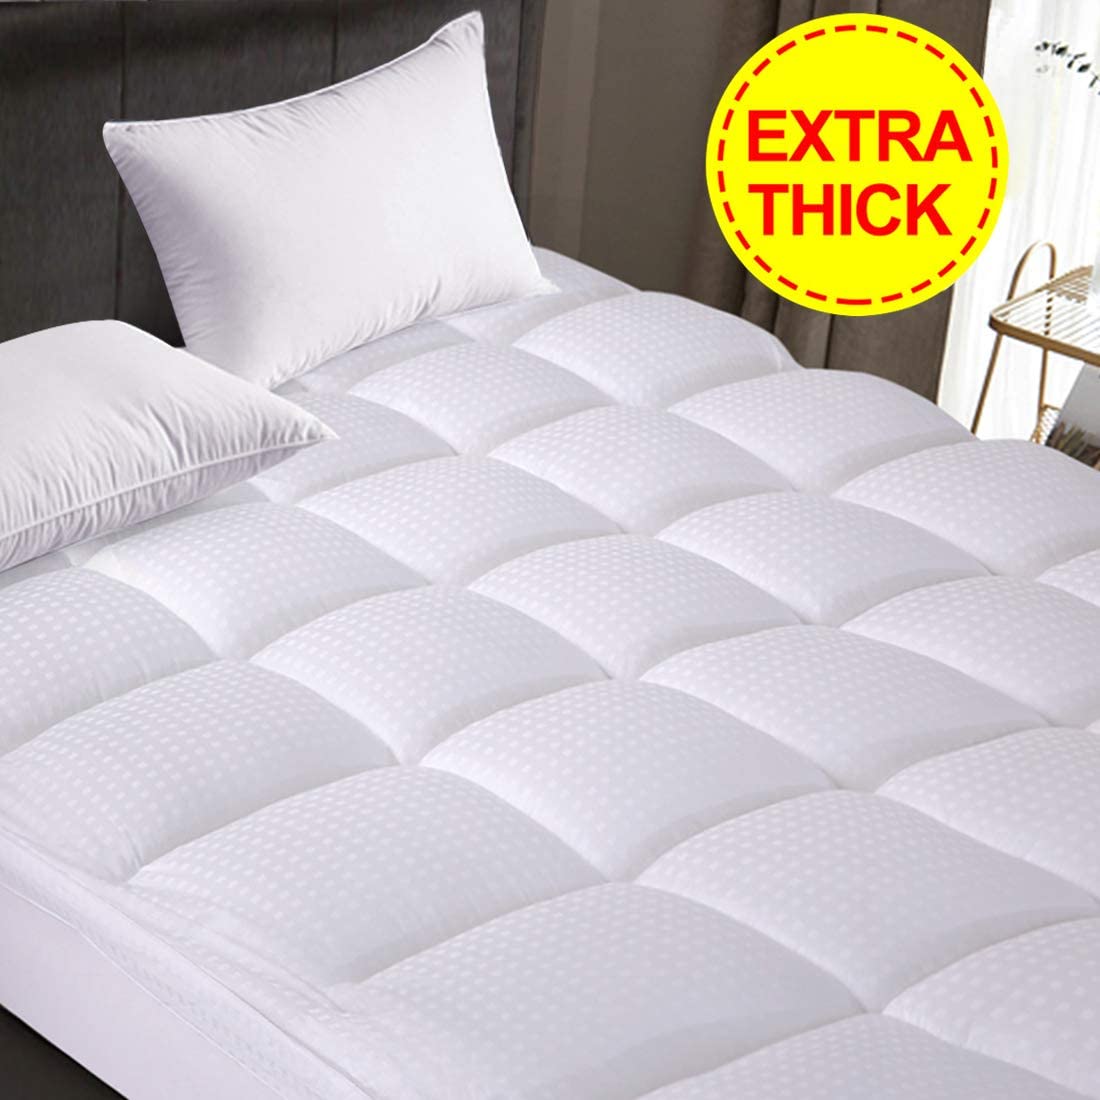 Thick Mattress Toppers For an Extra Cozy Nights Sleep Amazon